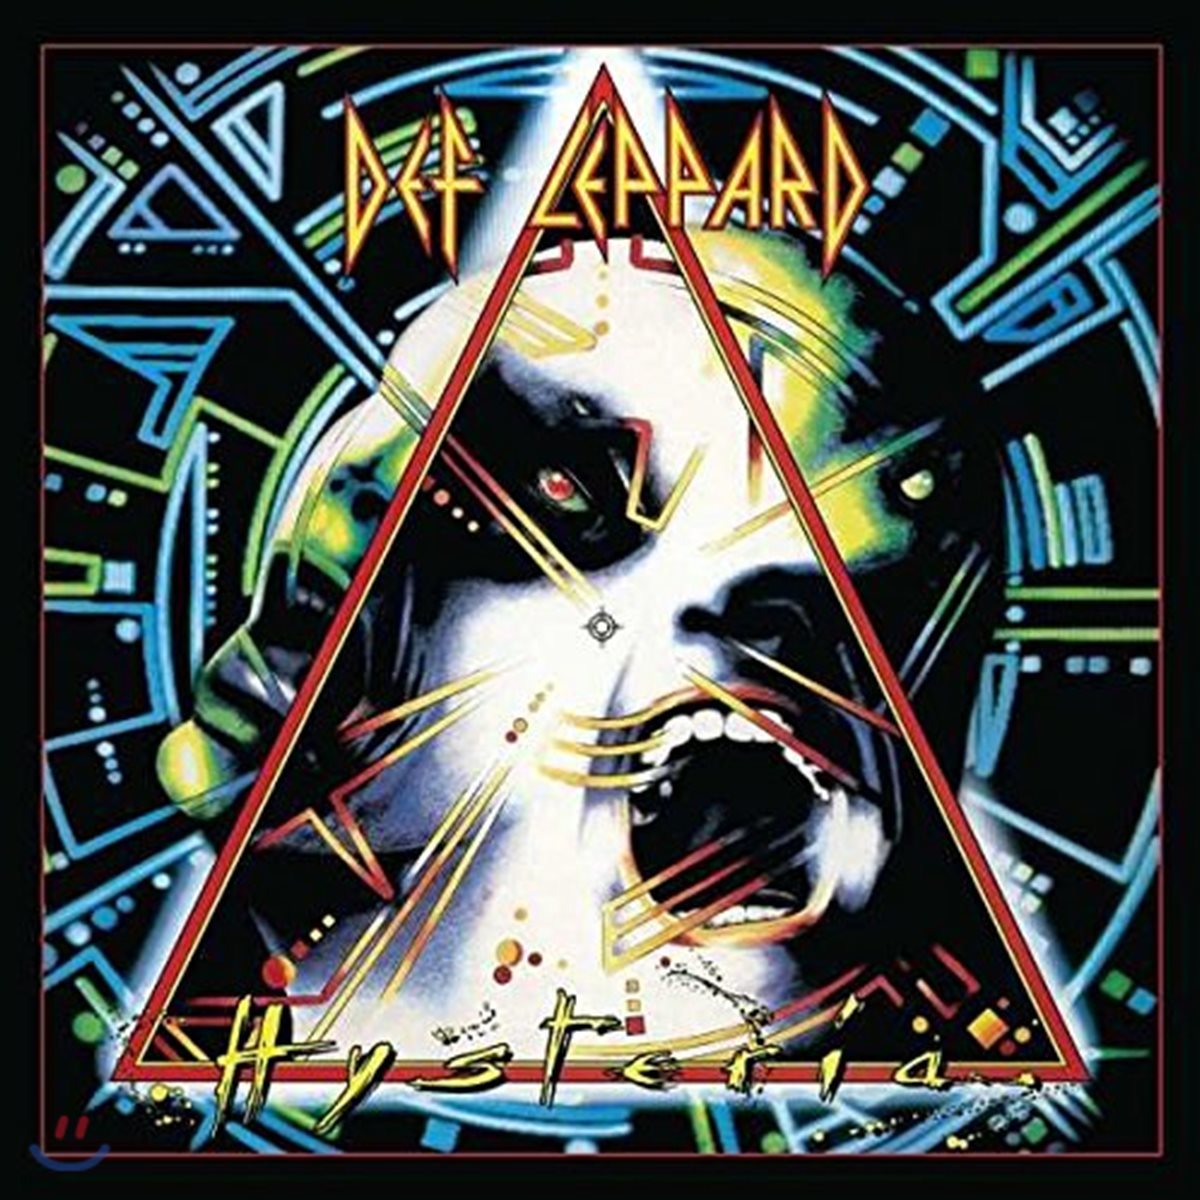 Def Leppard (데프 레퍼드) - Hysteria [3CD Deluxe Edition]